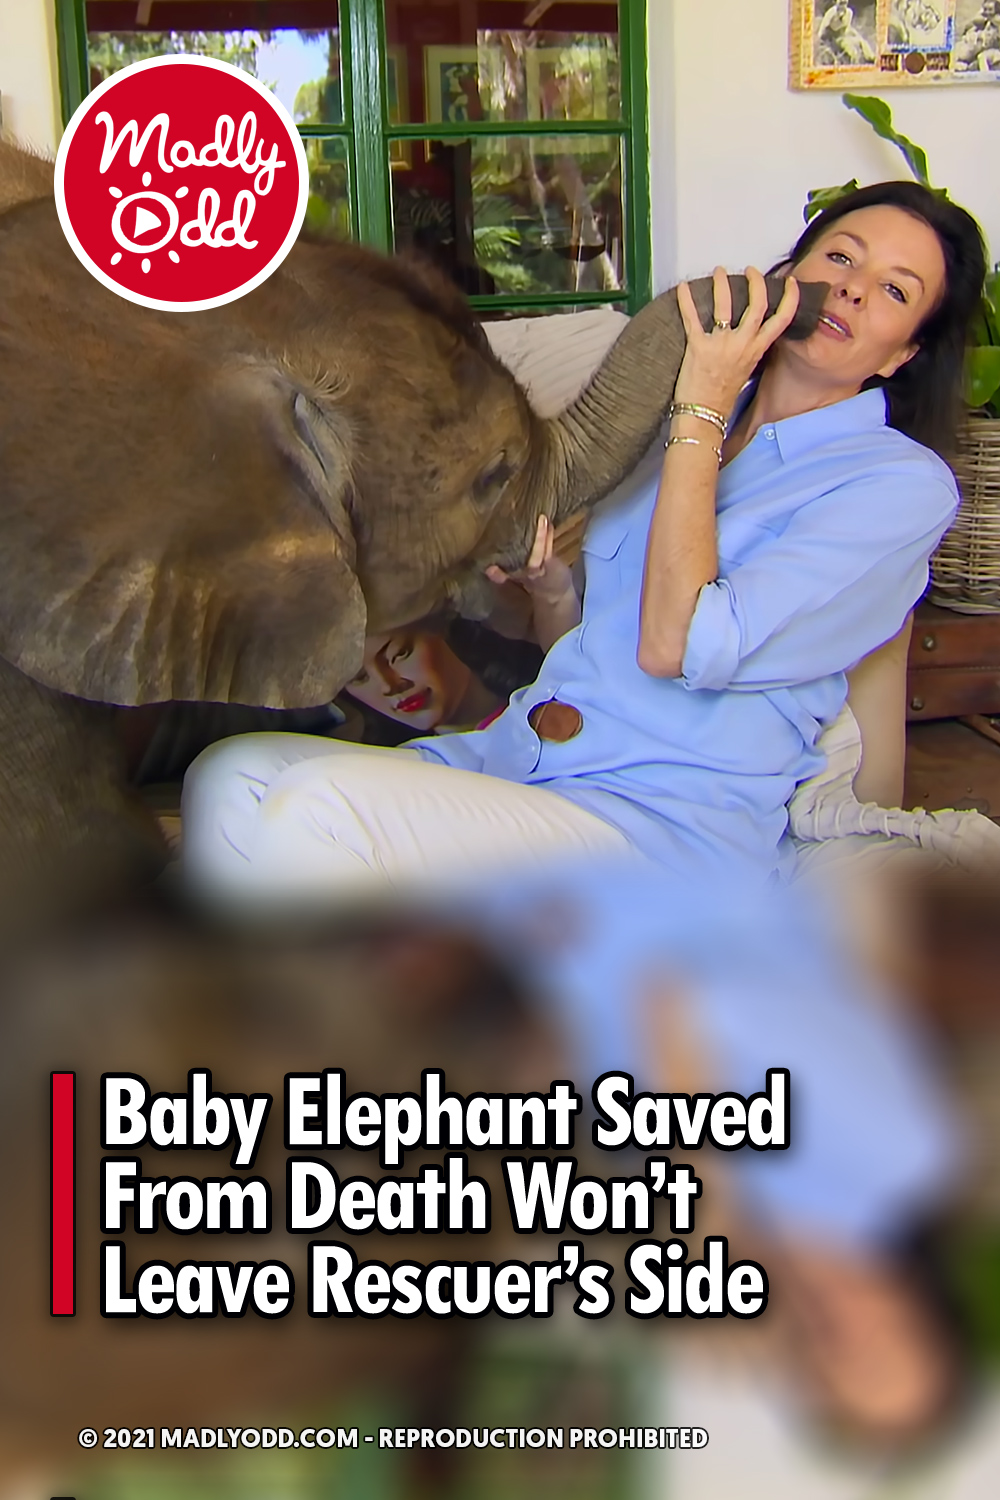 Baby Elephant Saved From Death Won’t Leave Rescuer’s Side